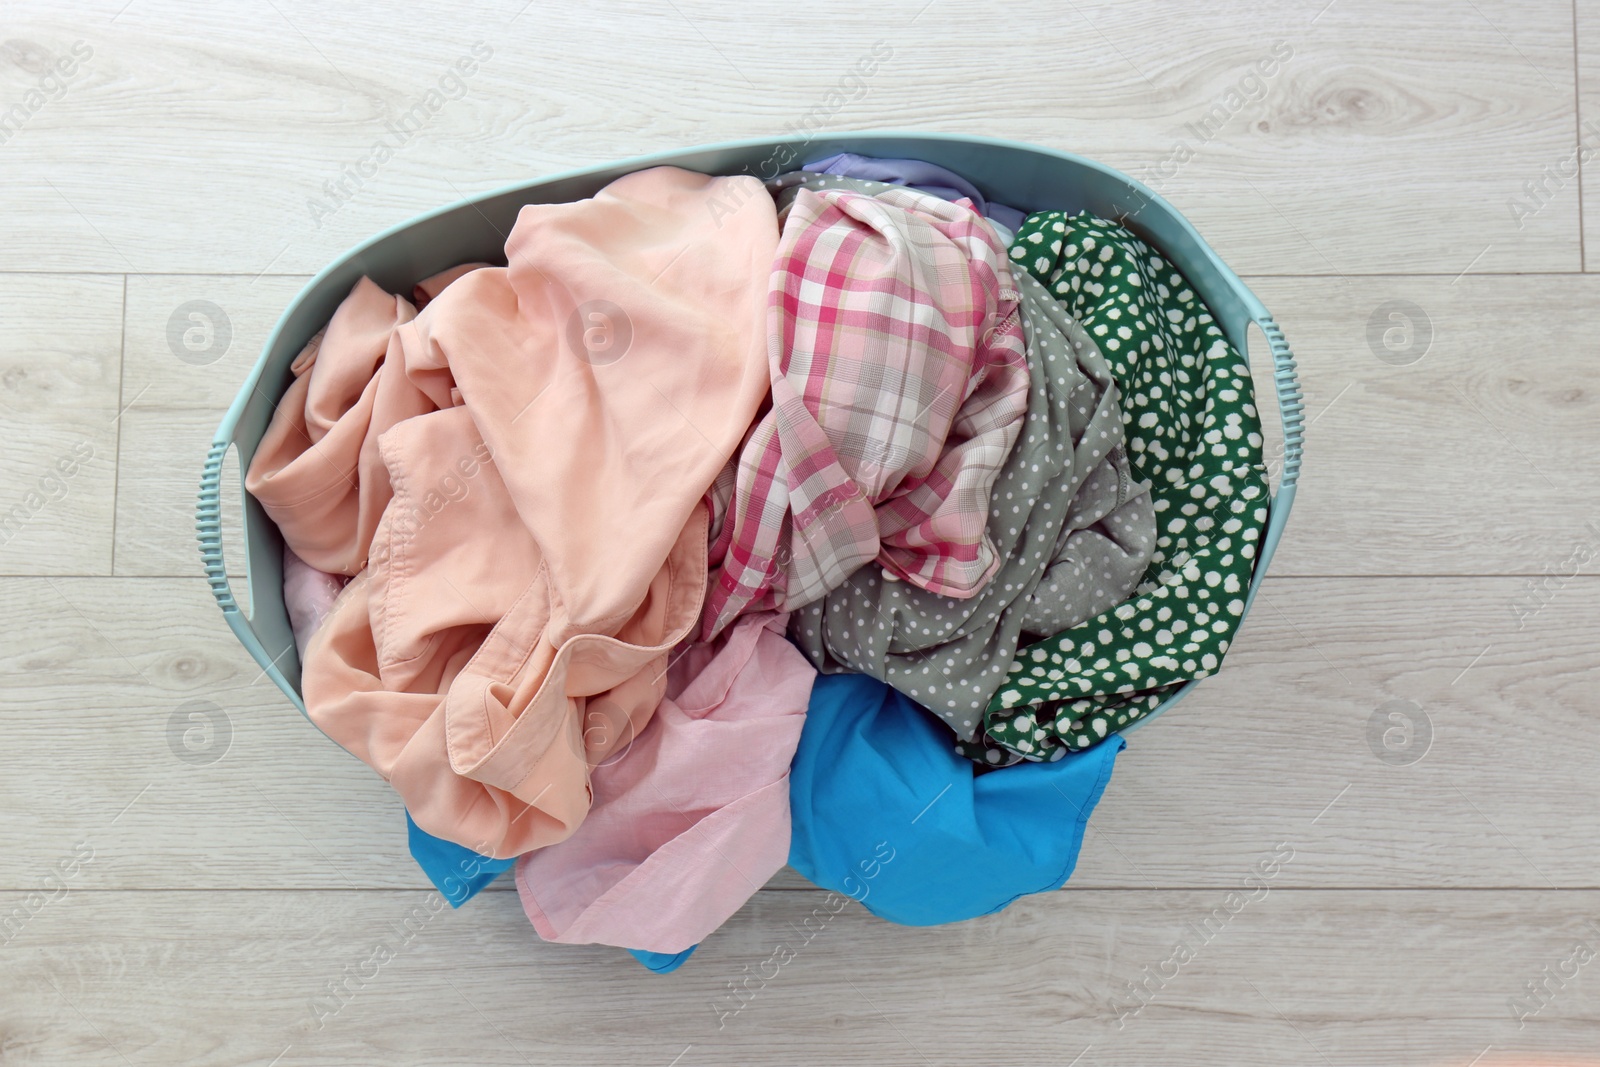 Photo of Laundry basket with clothes on white floor, top view